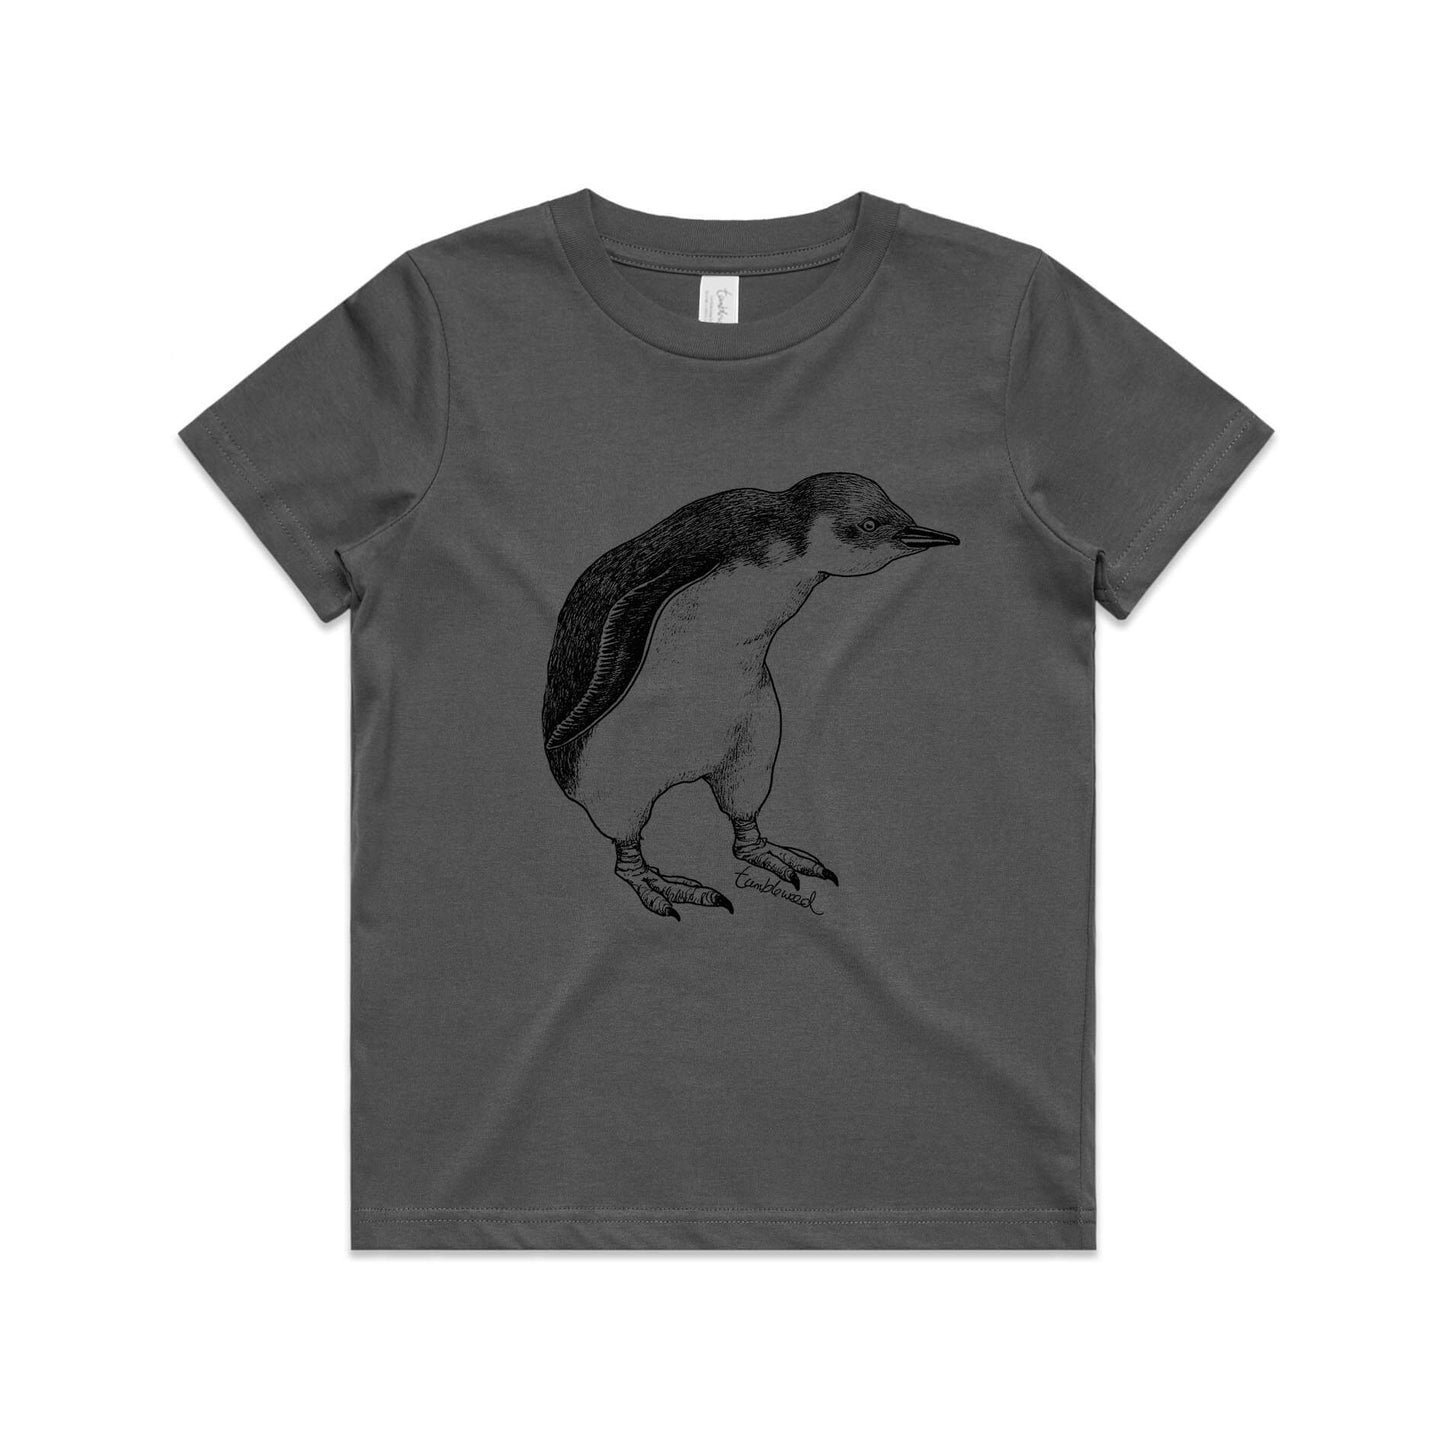 Charcoal, cotton kids' t-shirt with screen printed Kids little penguin design.